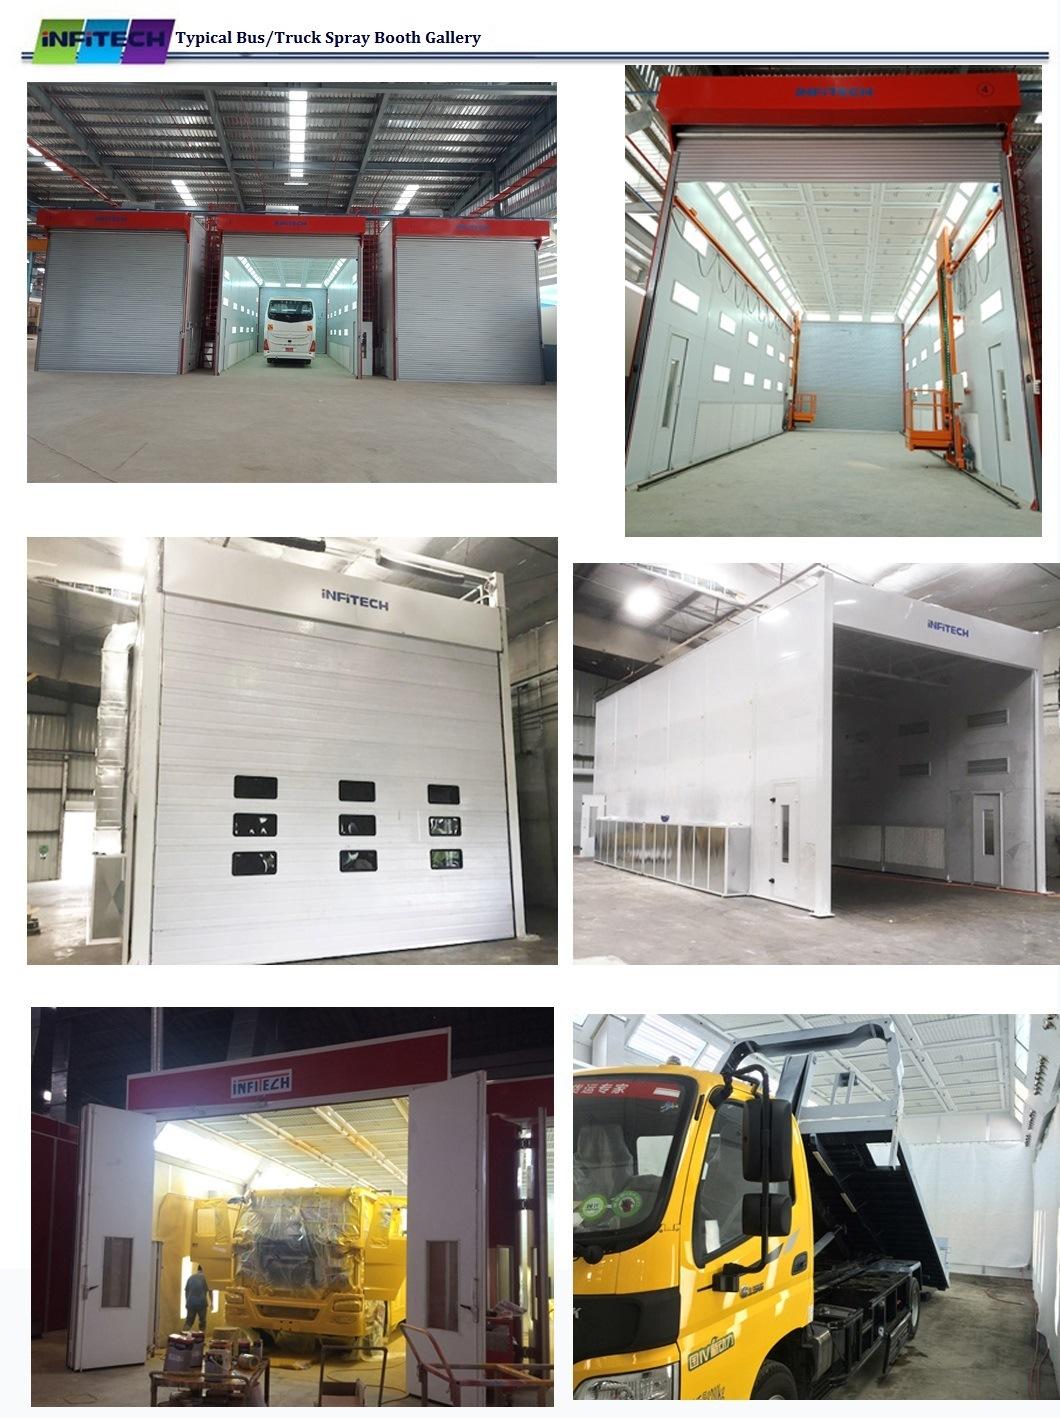 New Zealand Standard Customized Industrial Bus Paint Booth with 2 Work Zones